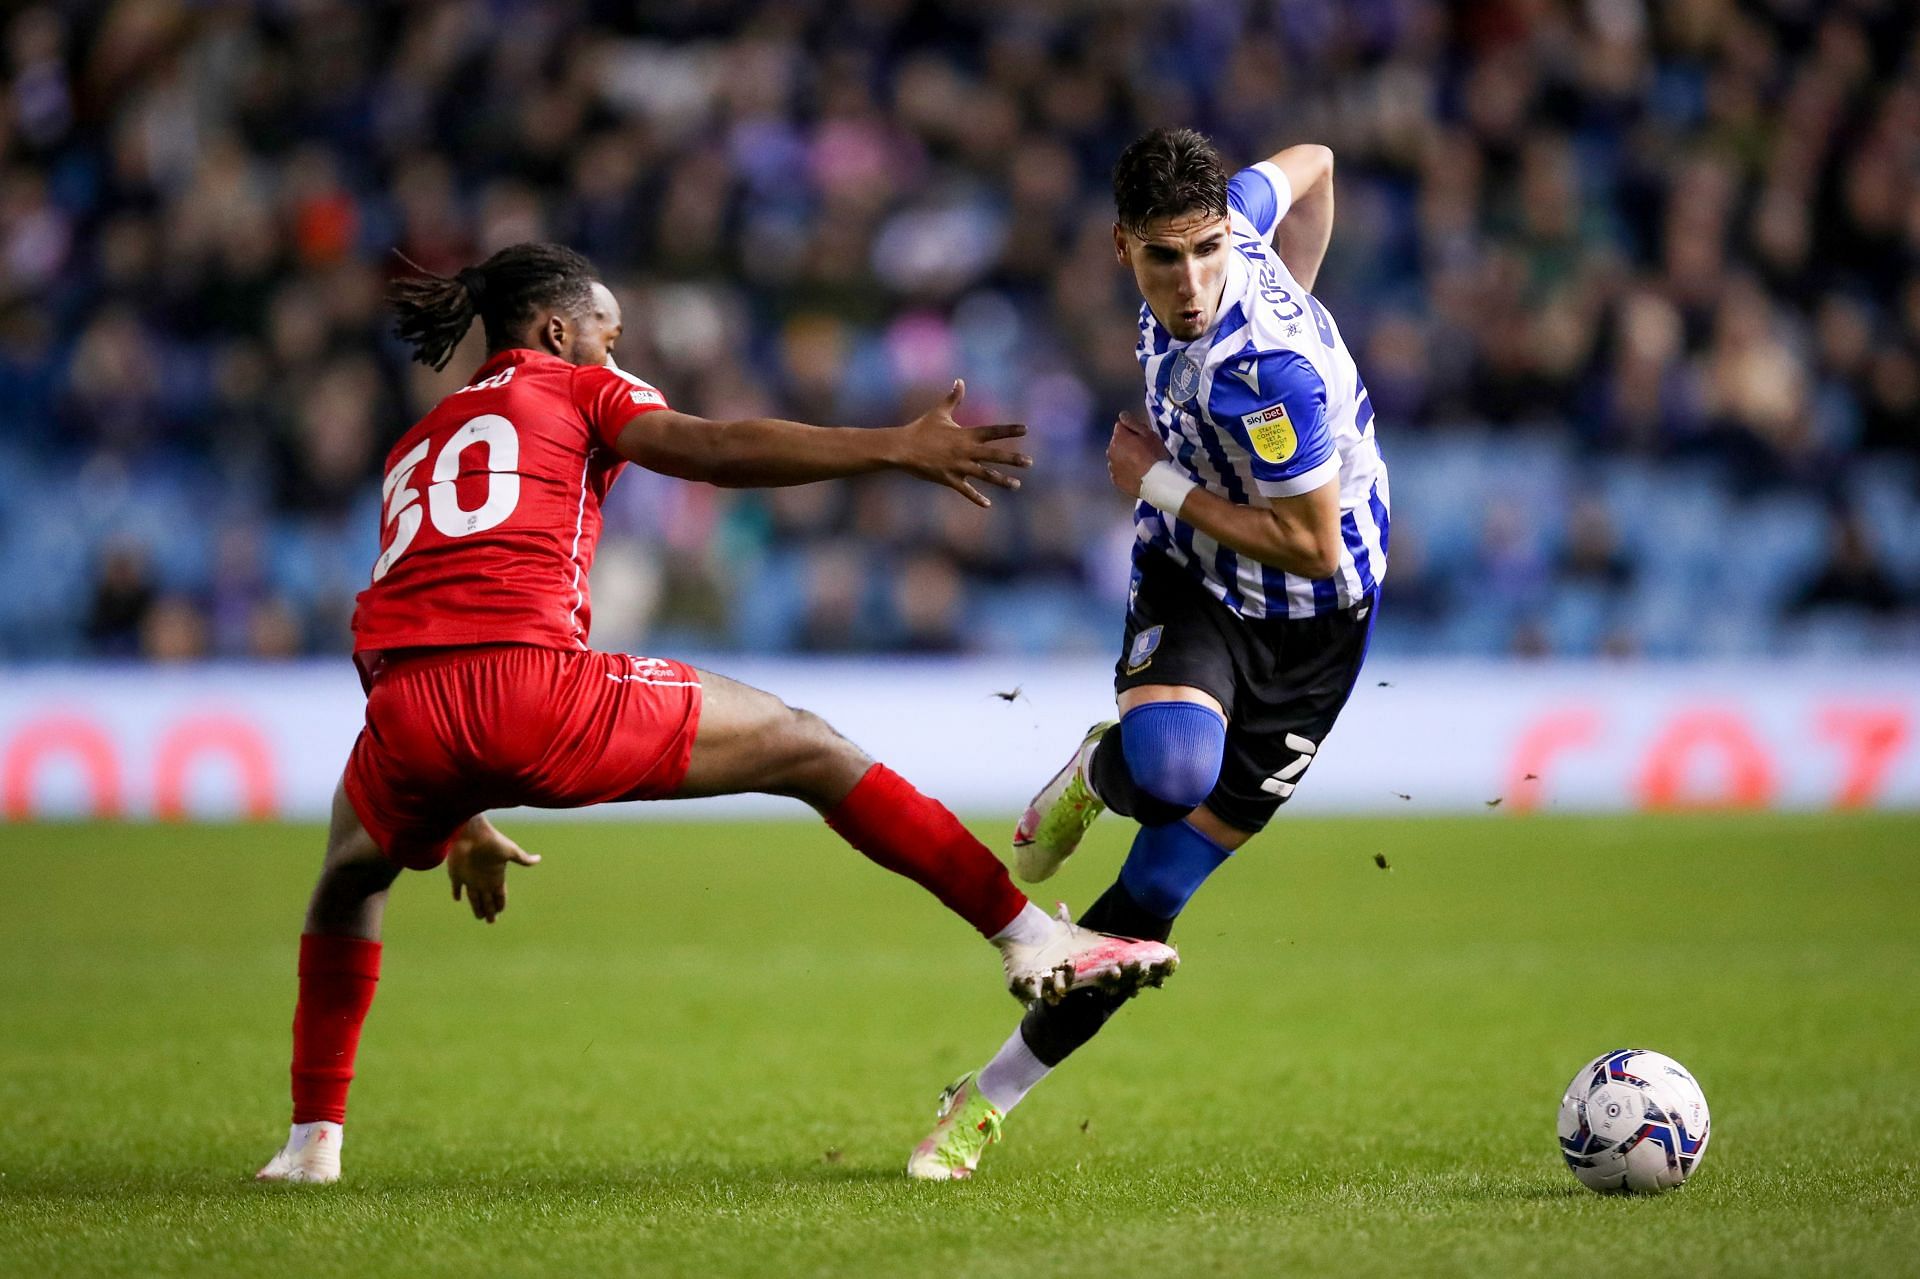 Sheffield Wednesday square off against Burton Albion on Tuesday